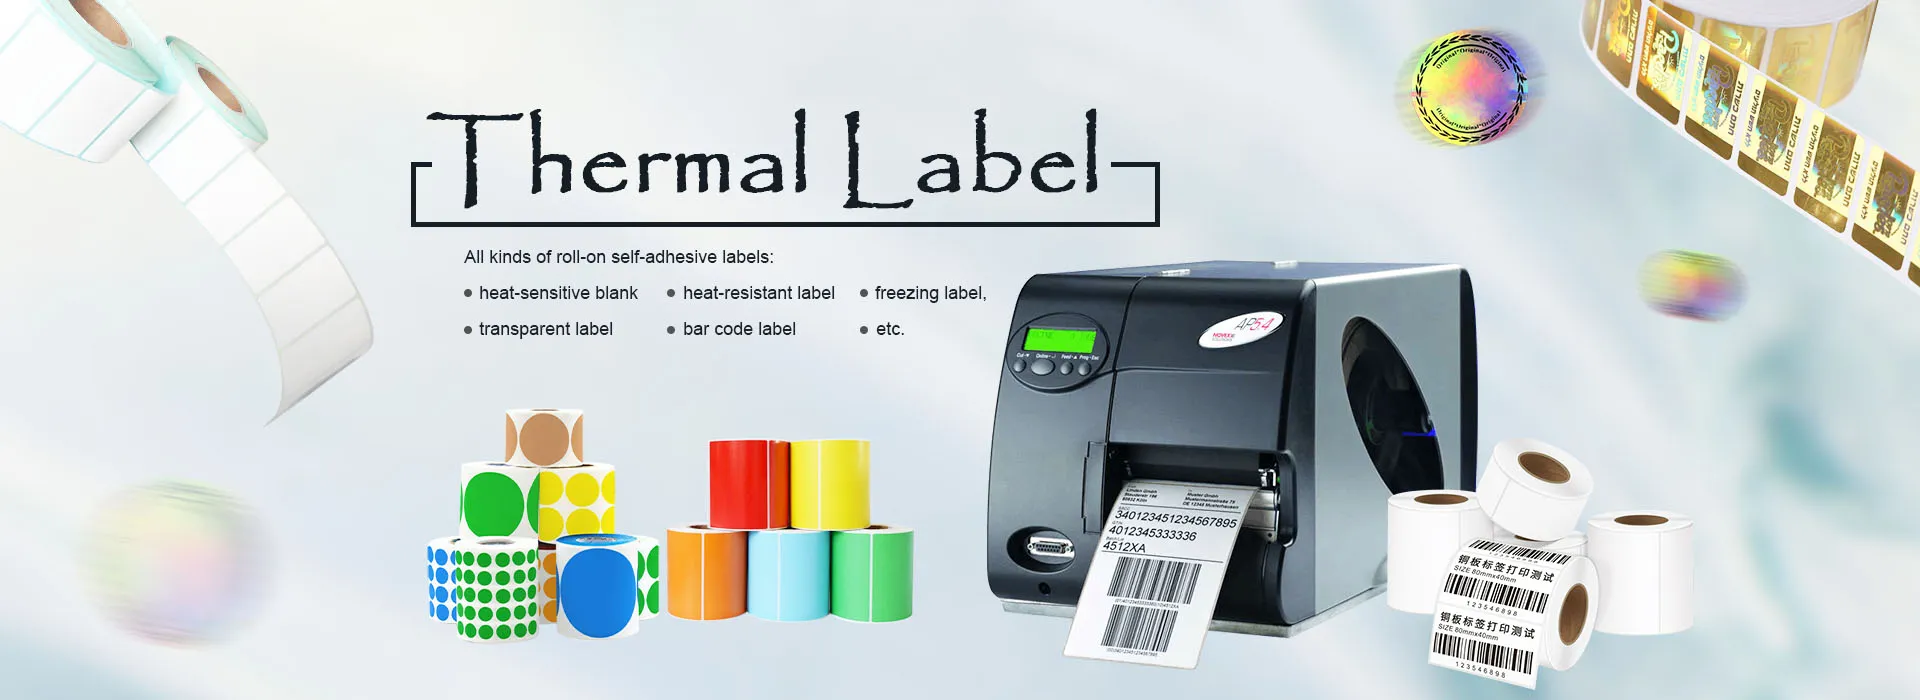 Thermal Label Manufacturers